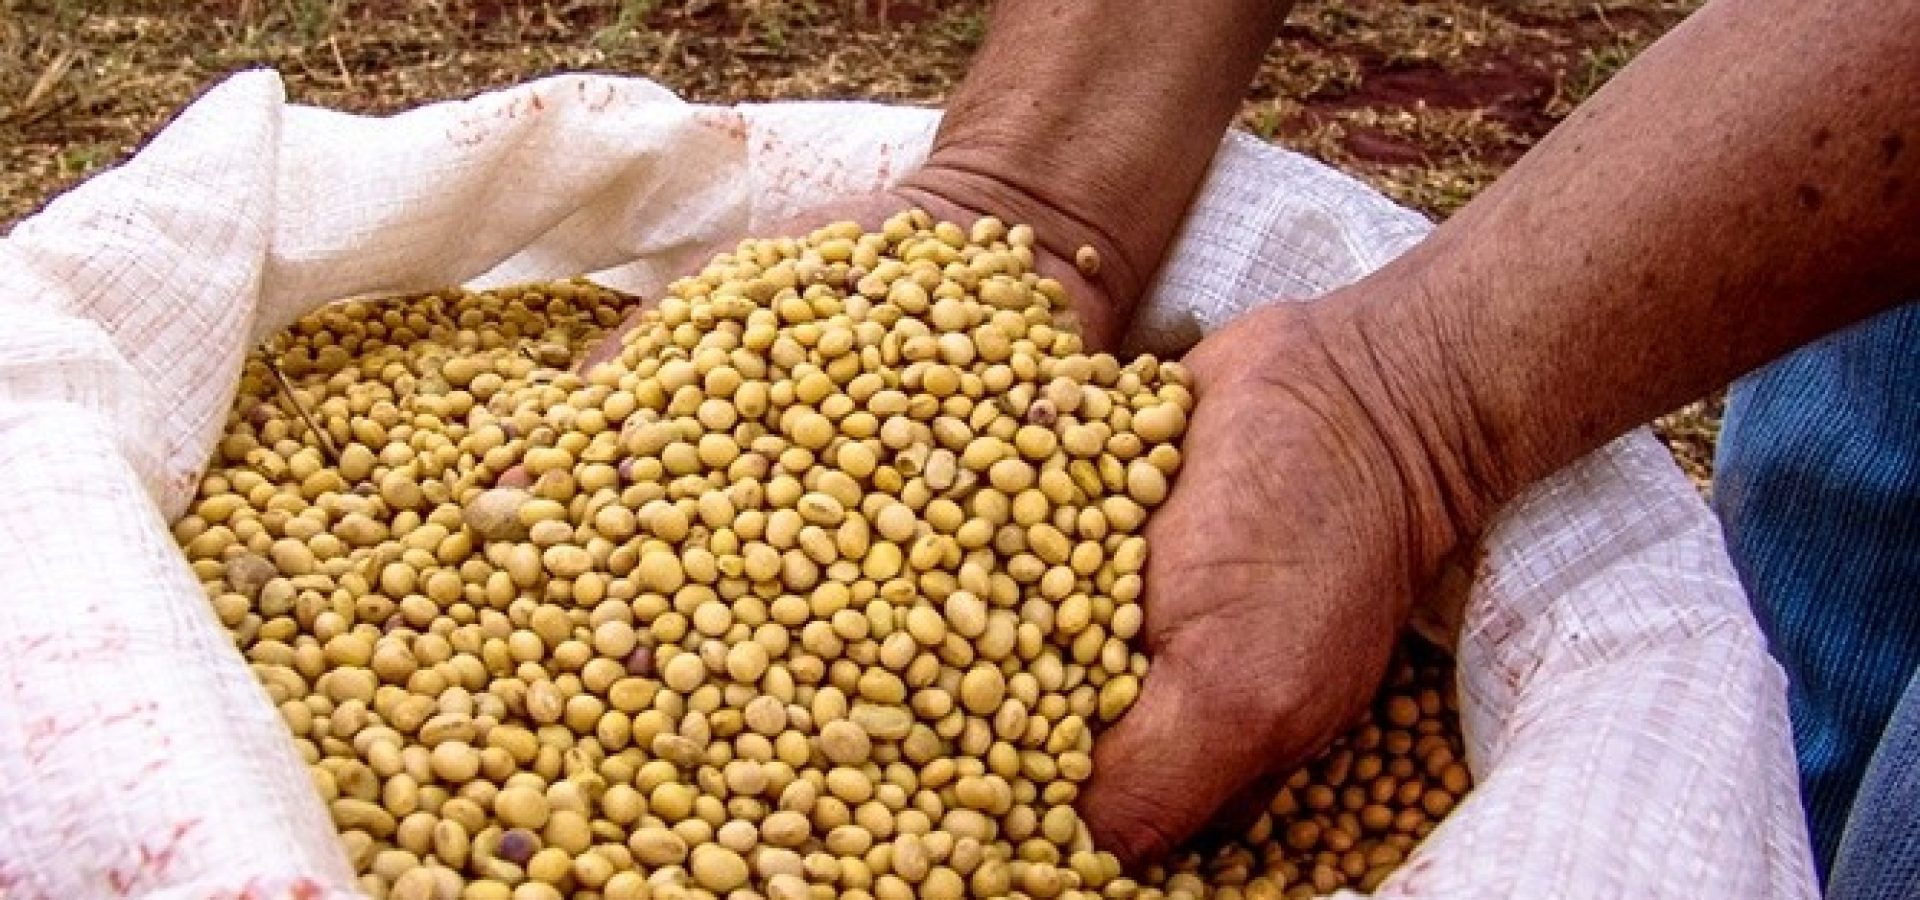 Wibest – United States: Two hands full of fried soybeans.